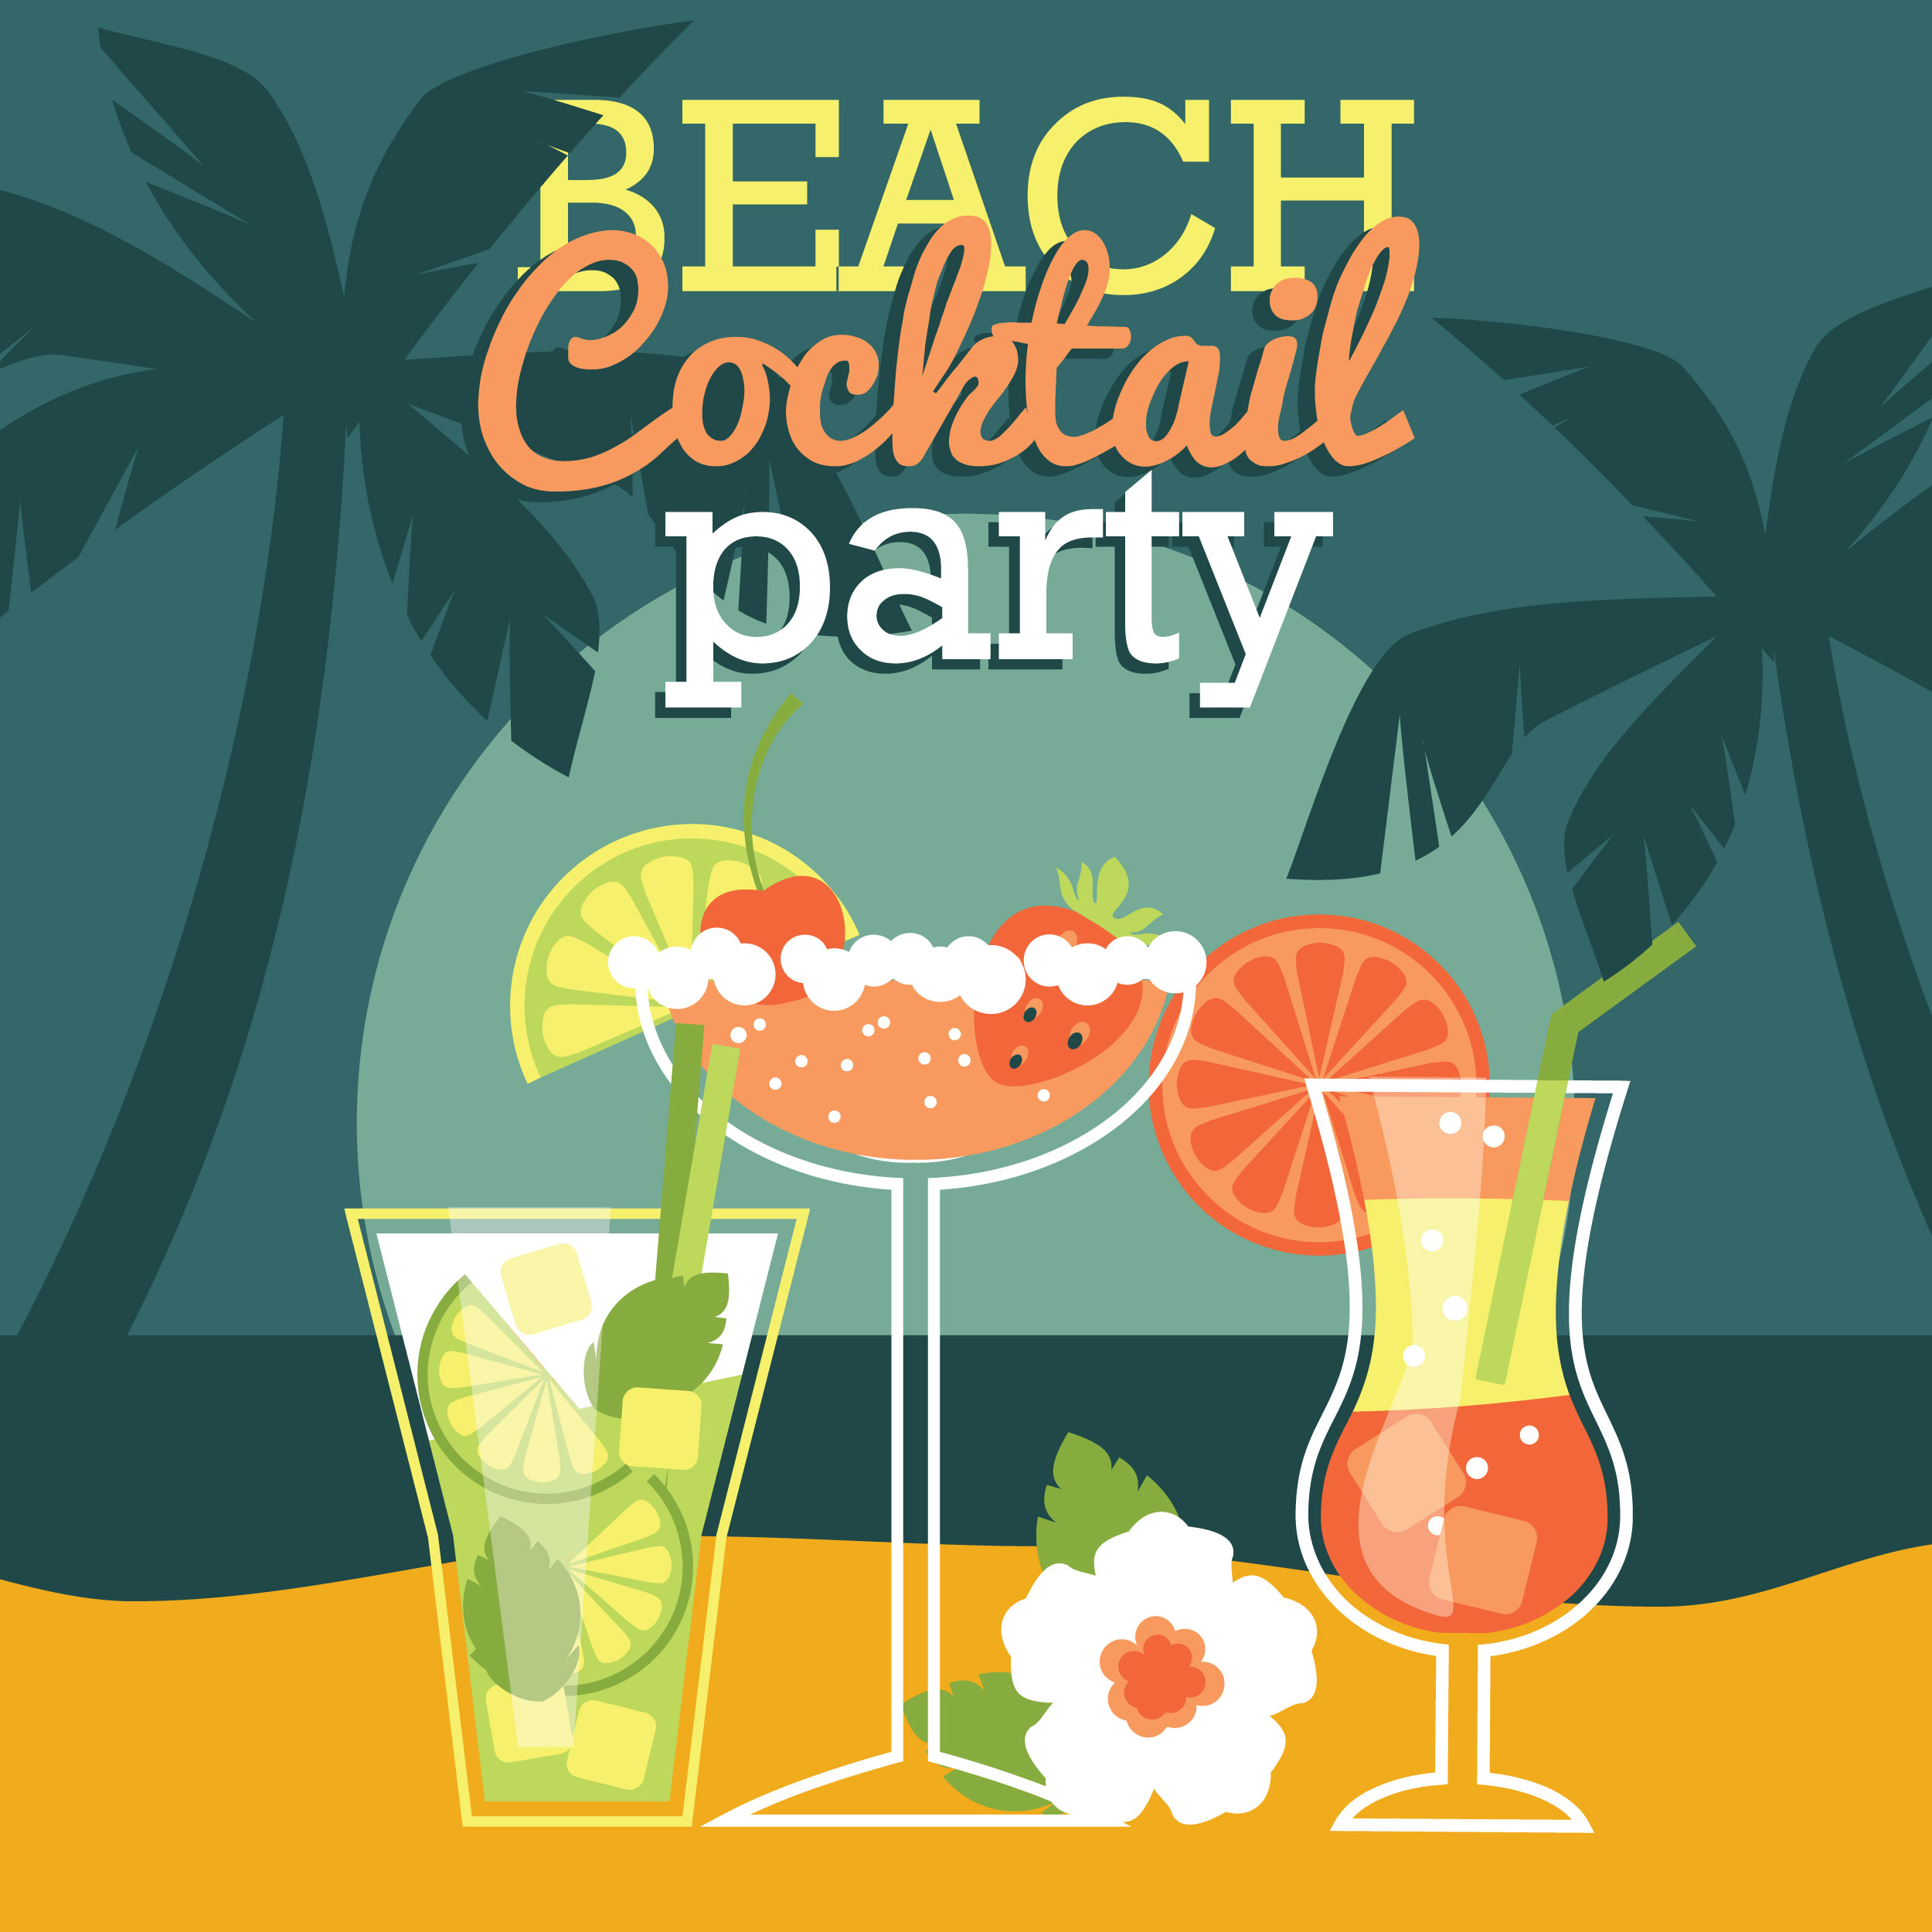 Beach cocktail party. Vector illustration Photoshop brush